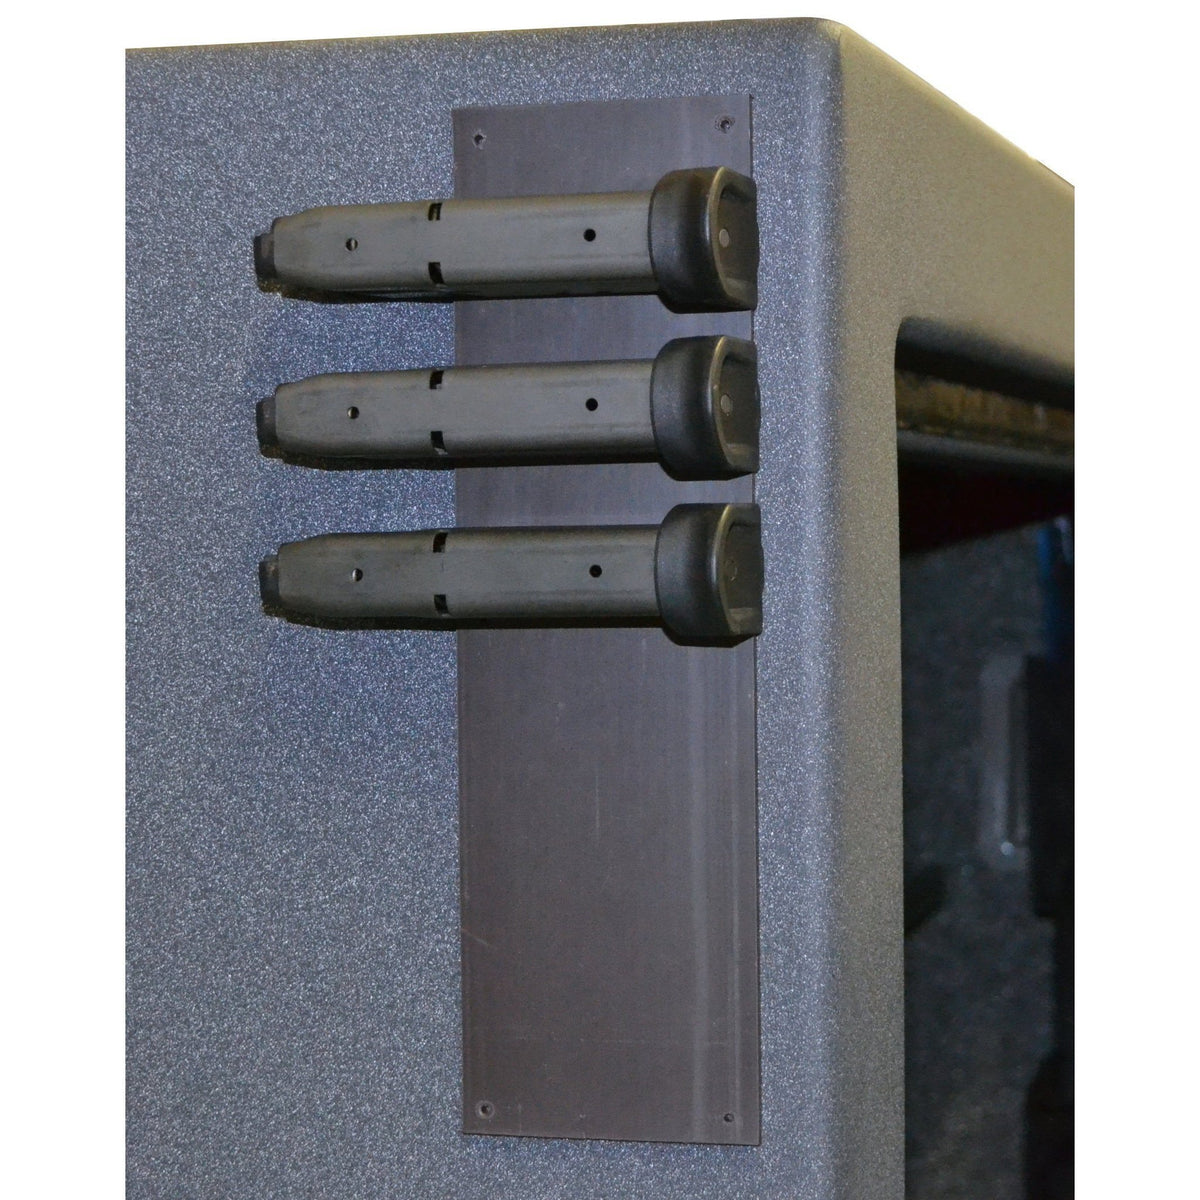 Accessory - Storage - Magnetic Mag Mount | Liberty Safe Norcal.